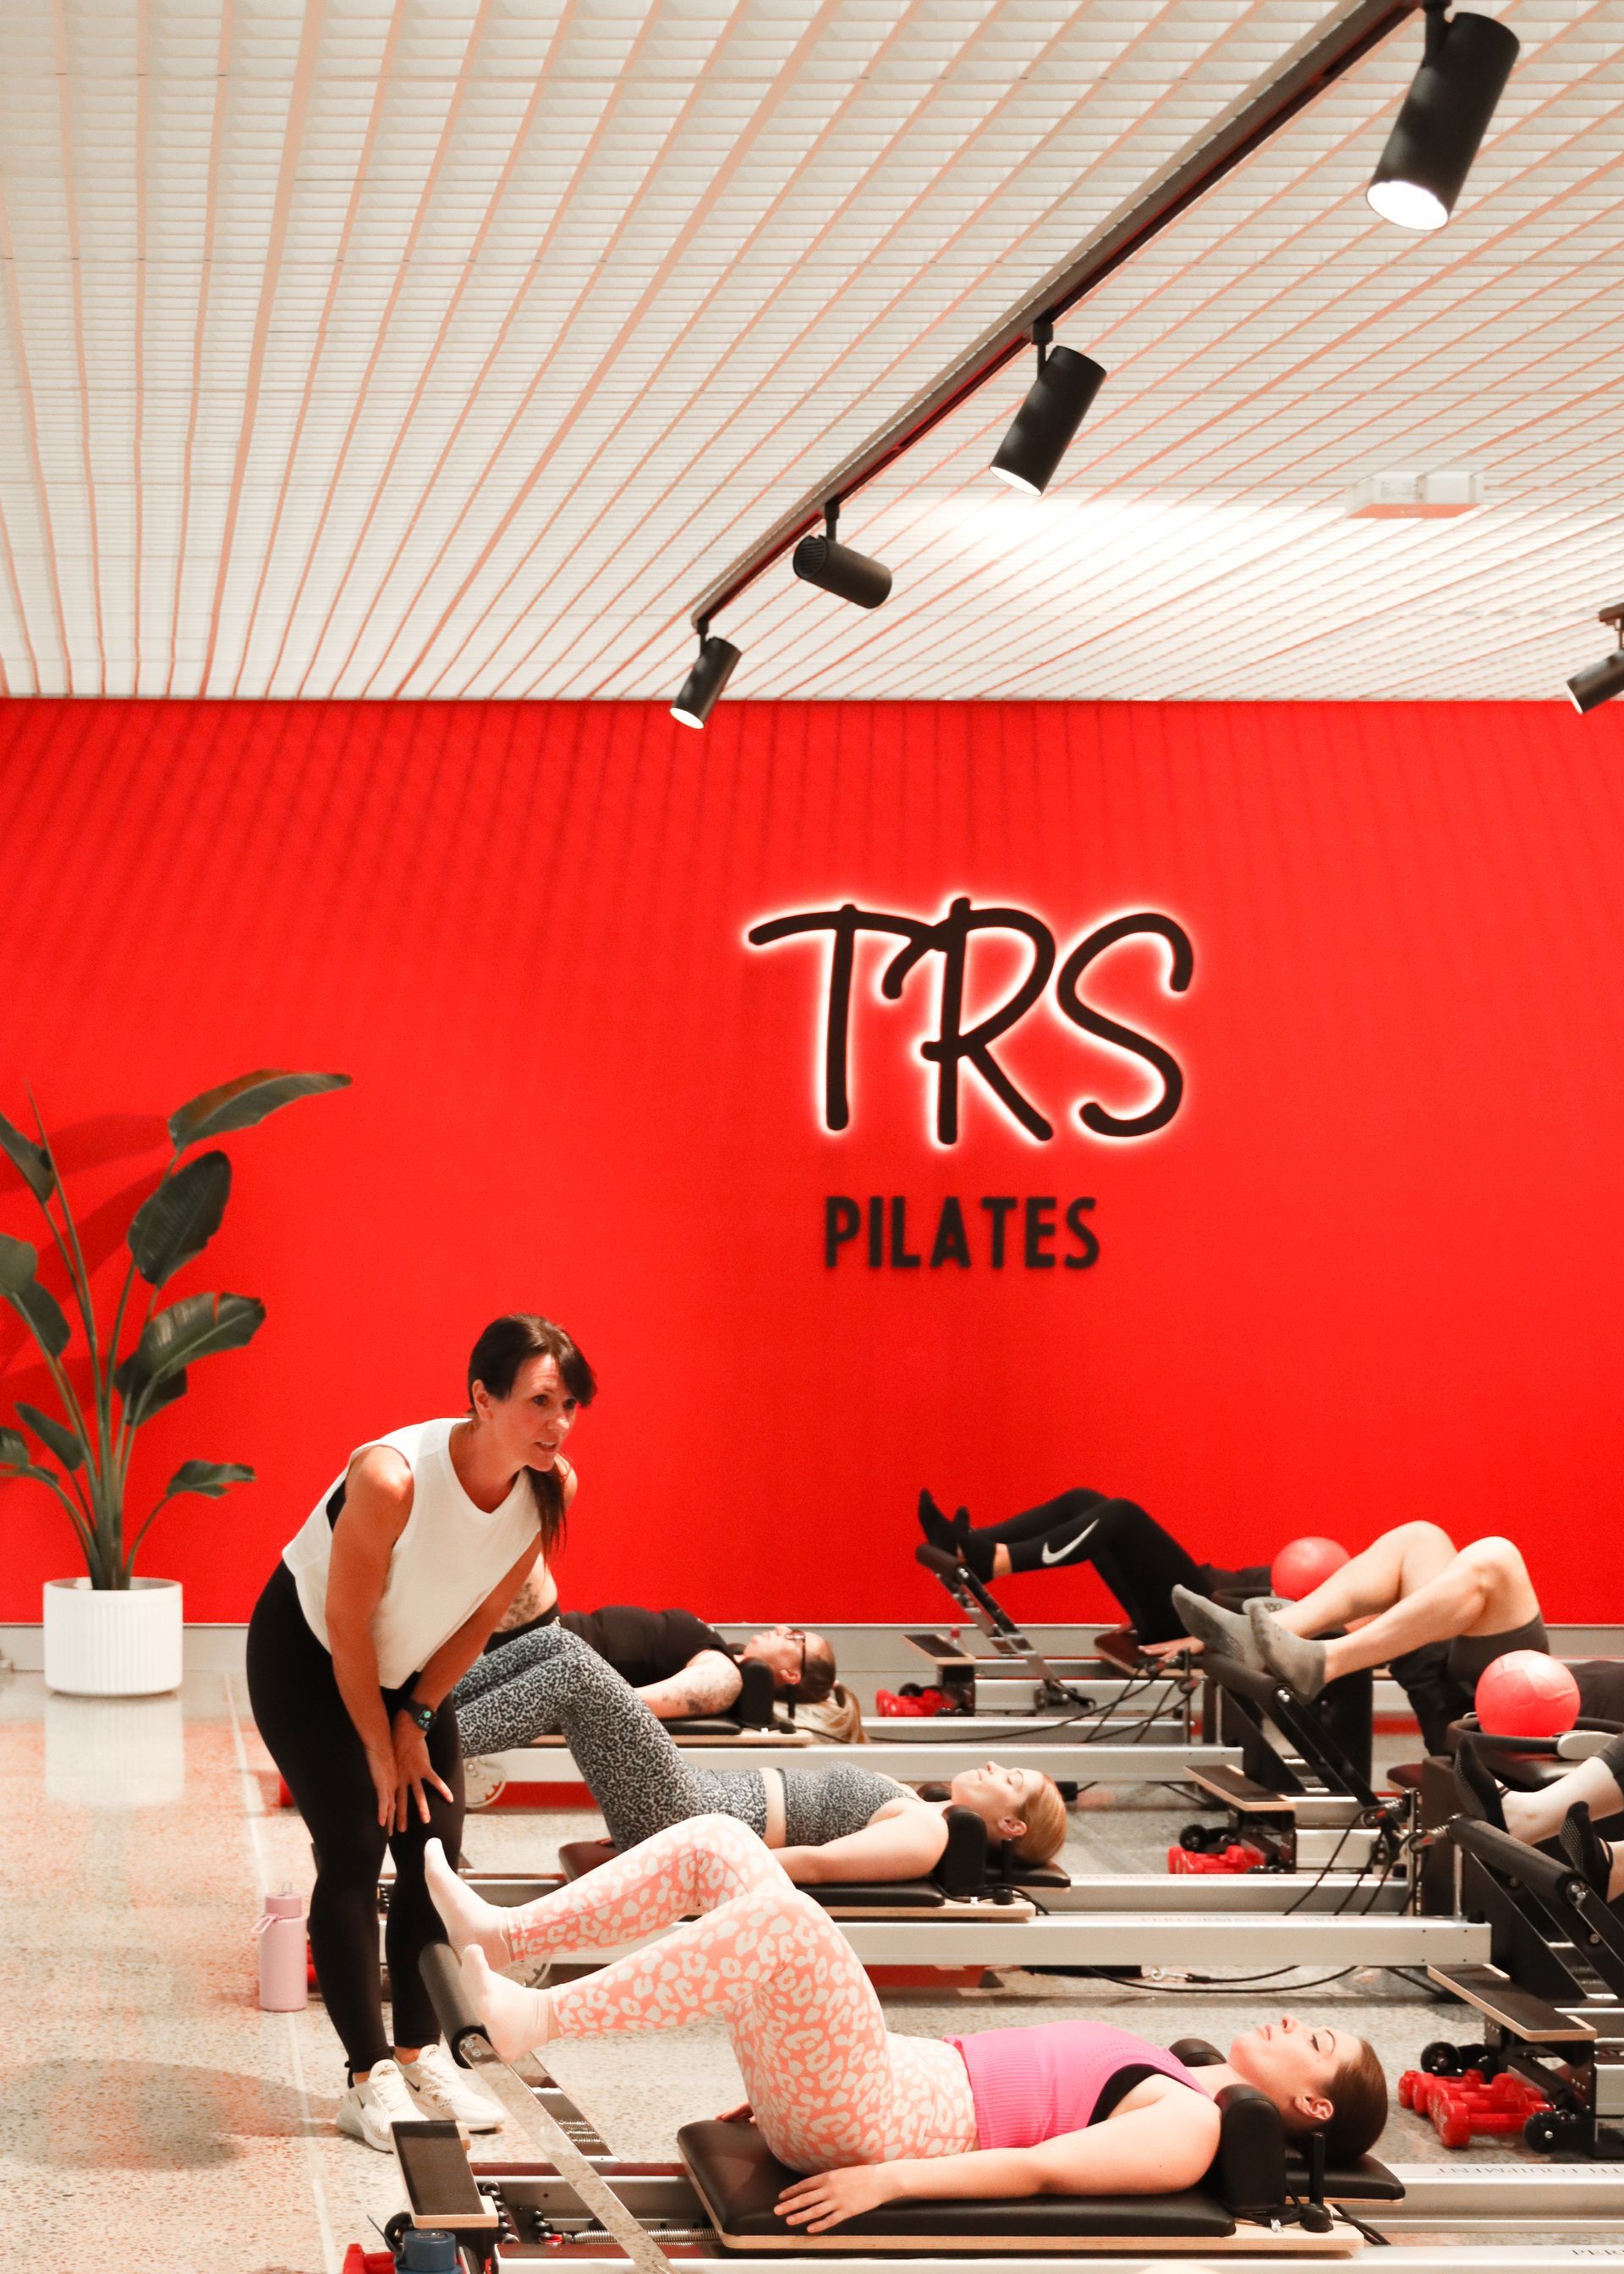 Image depicts the TRS Pilates Ballarat studio featuring the spectacular down lights, red feature wall with TRS lighted signage, large green fig plant in the corner, with at least 6 clients participating in a Reformer Pilates Class, whilst a senior instructor teaches the class.